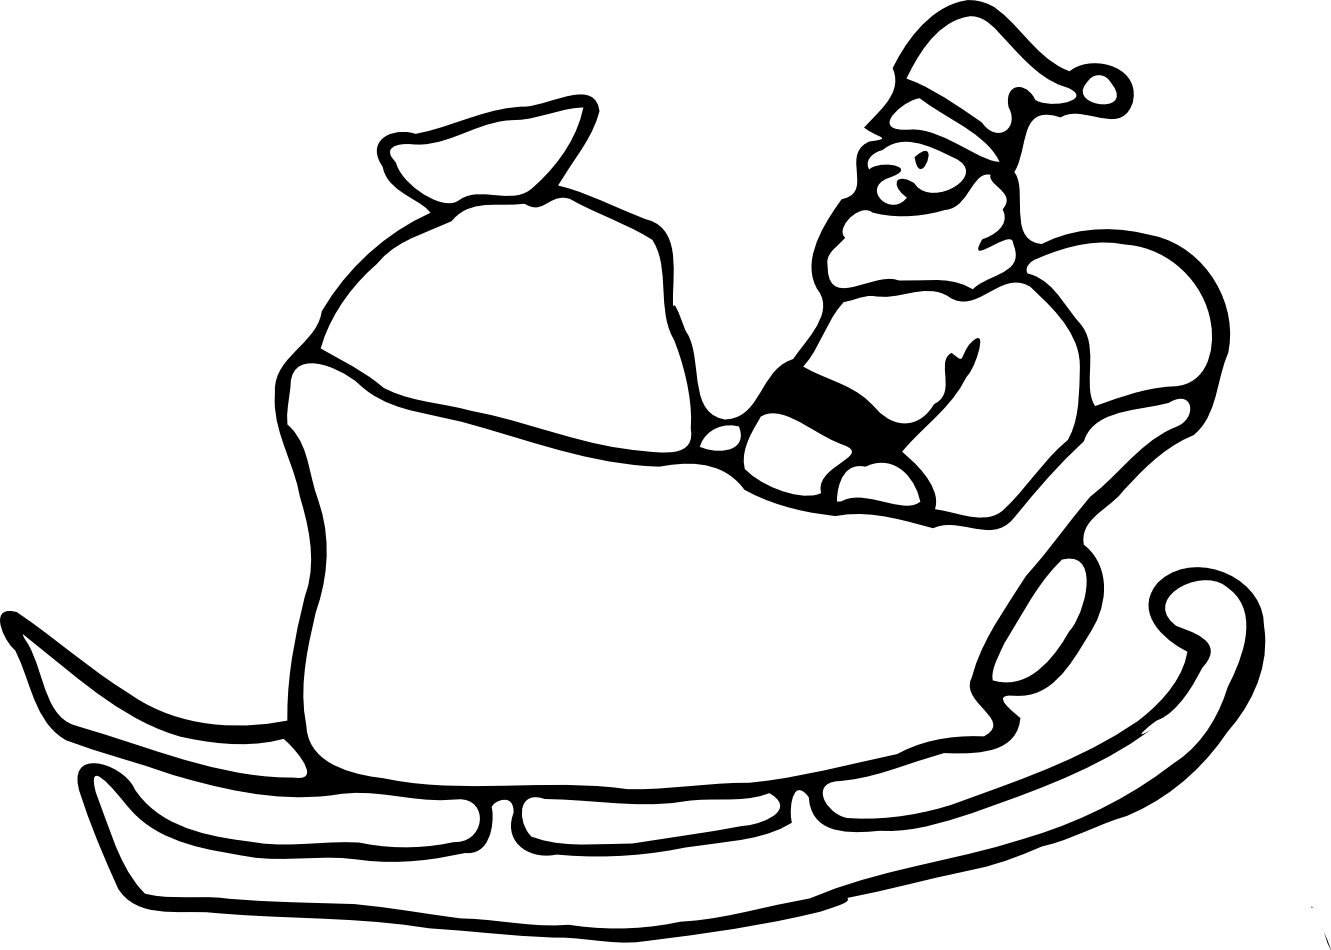 Free Santa Sleigh Clipart Black And White, Download Free.